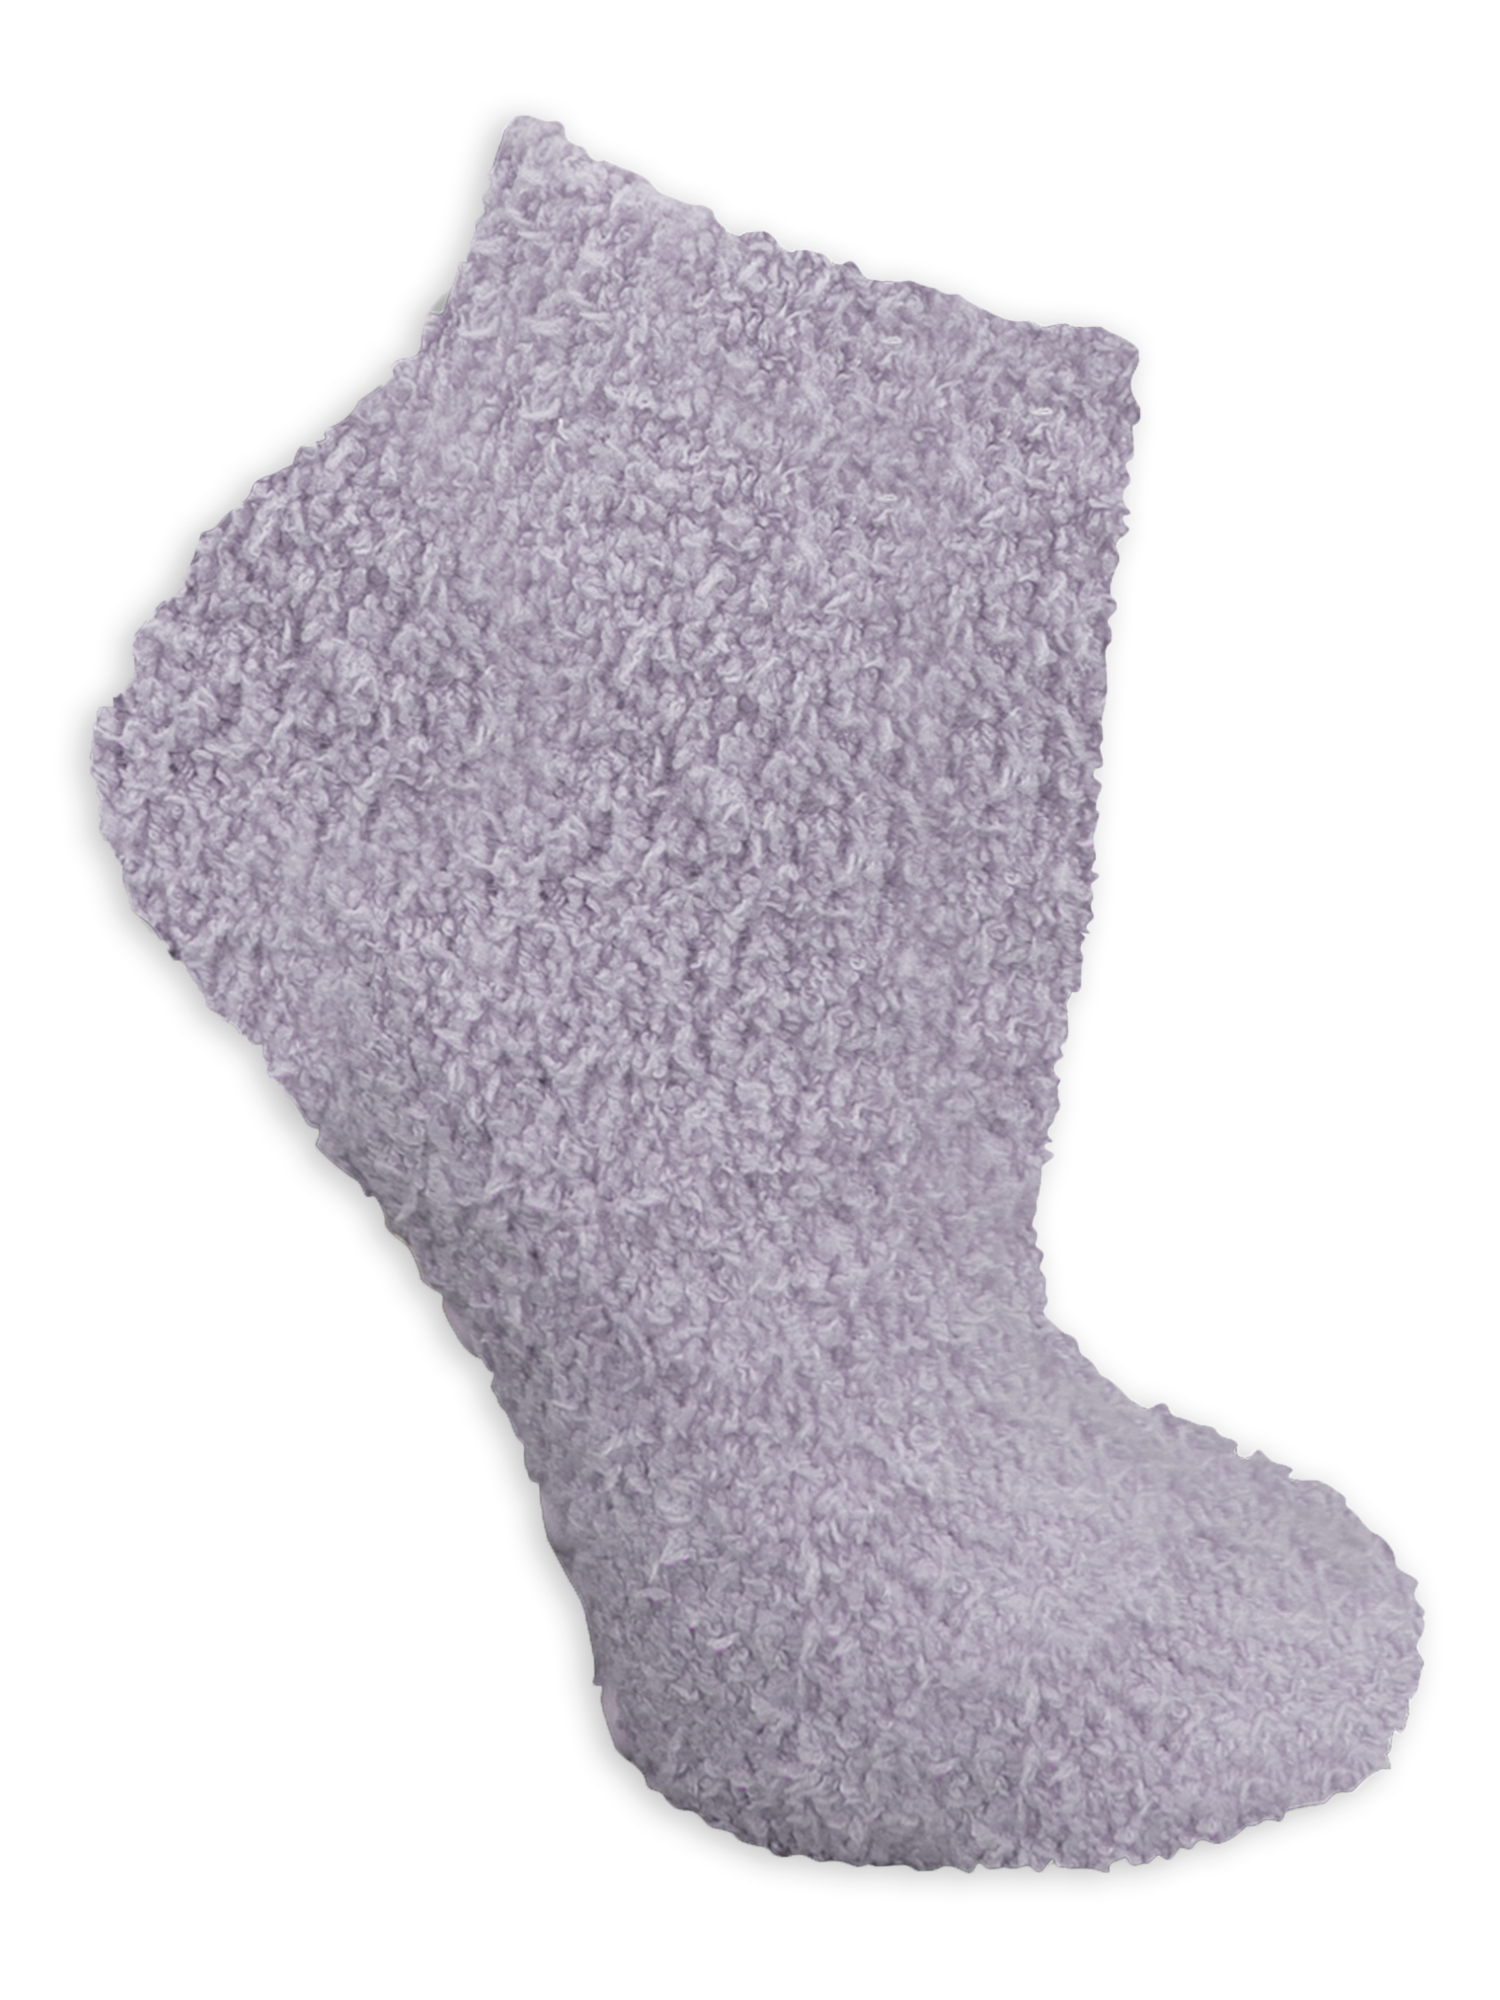 Women's Low Cut Spa Socks With Grippers 2 Pack - image 2 of 2